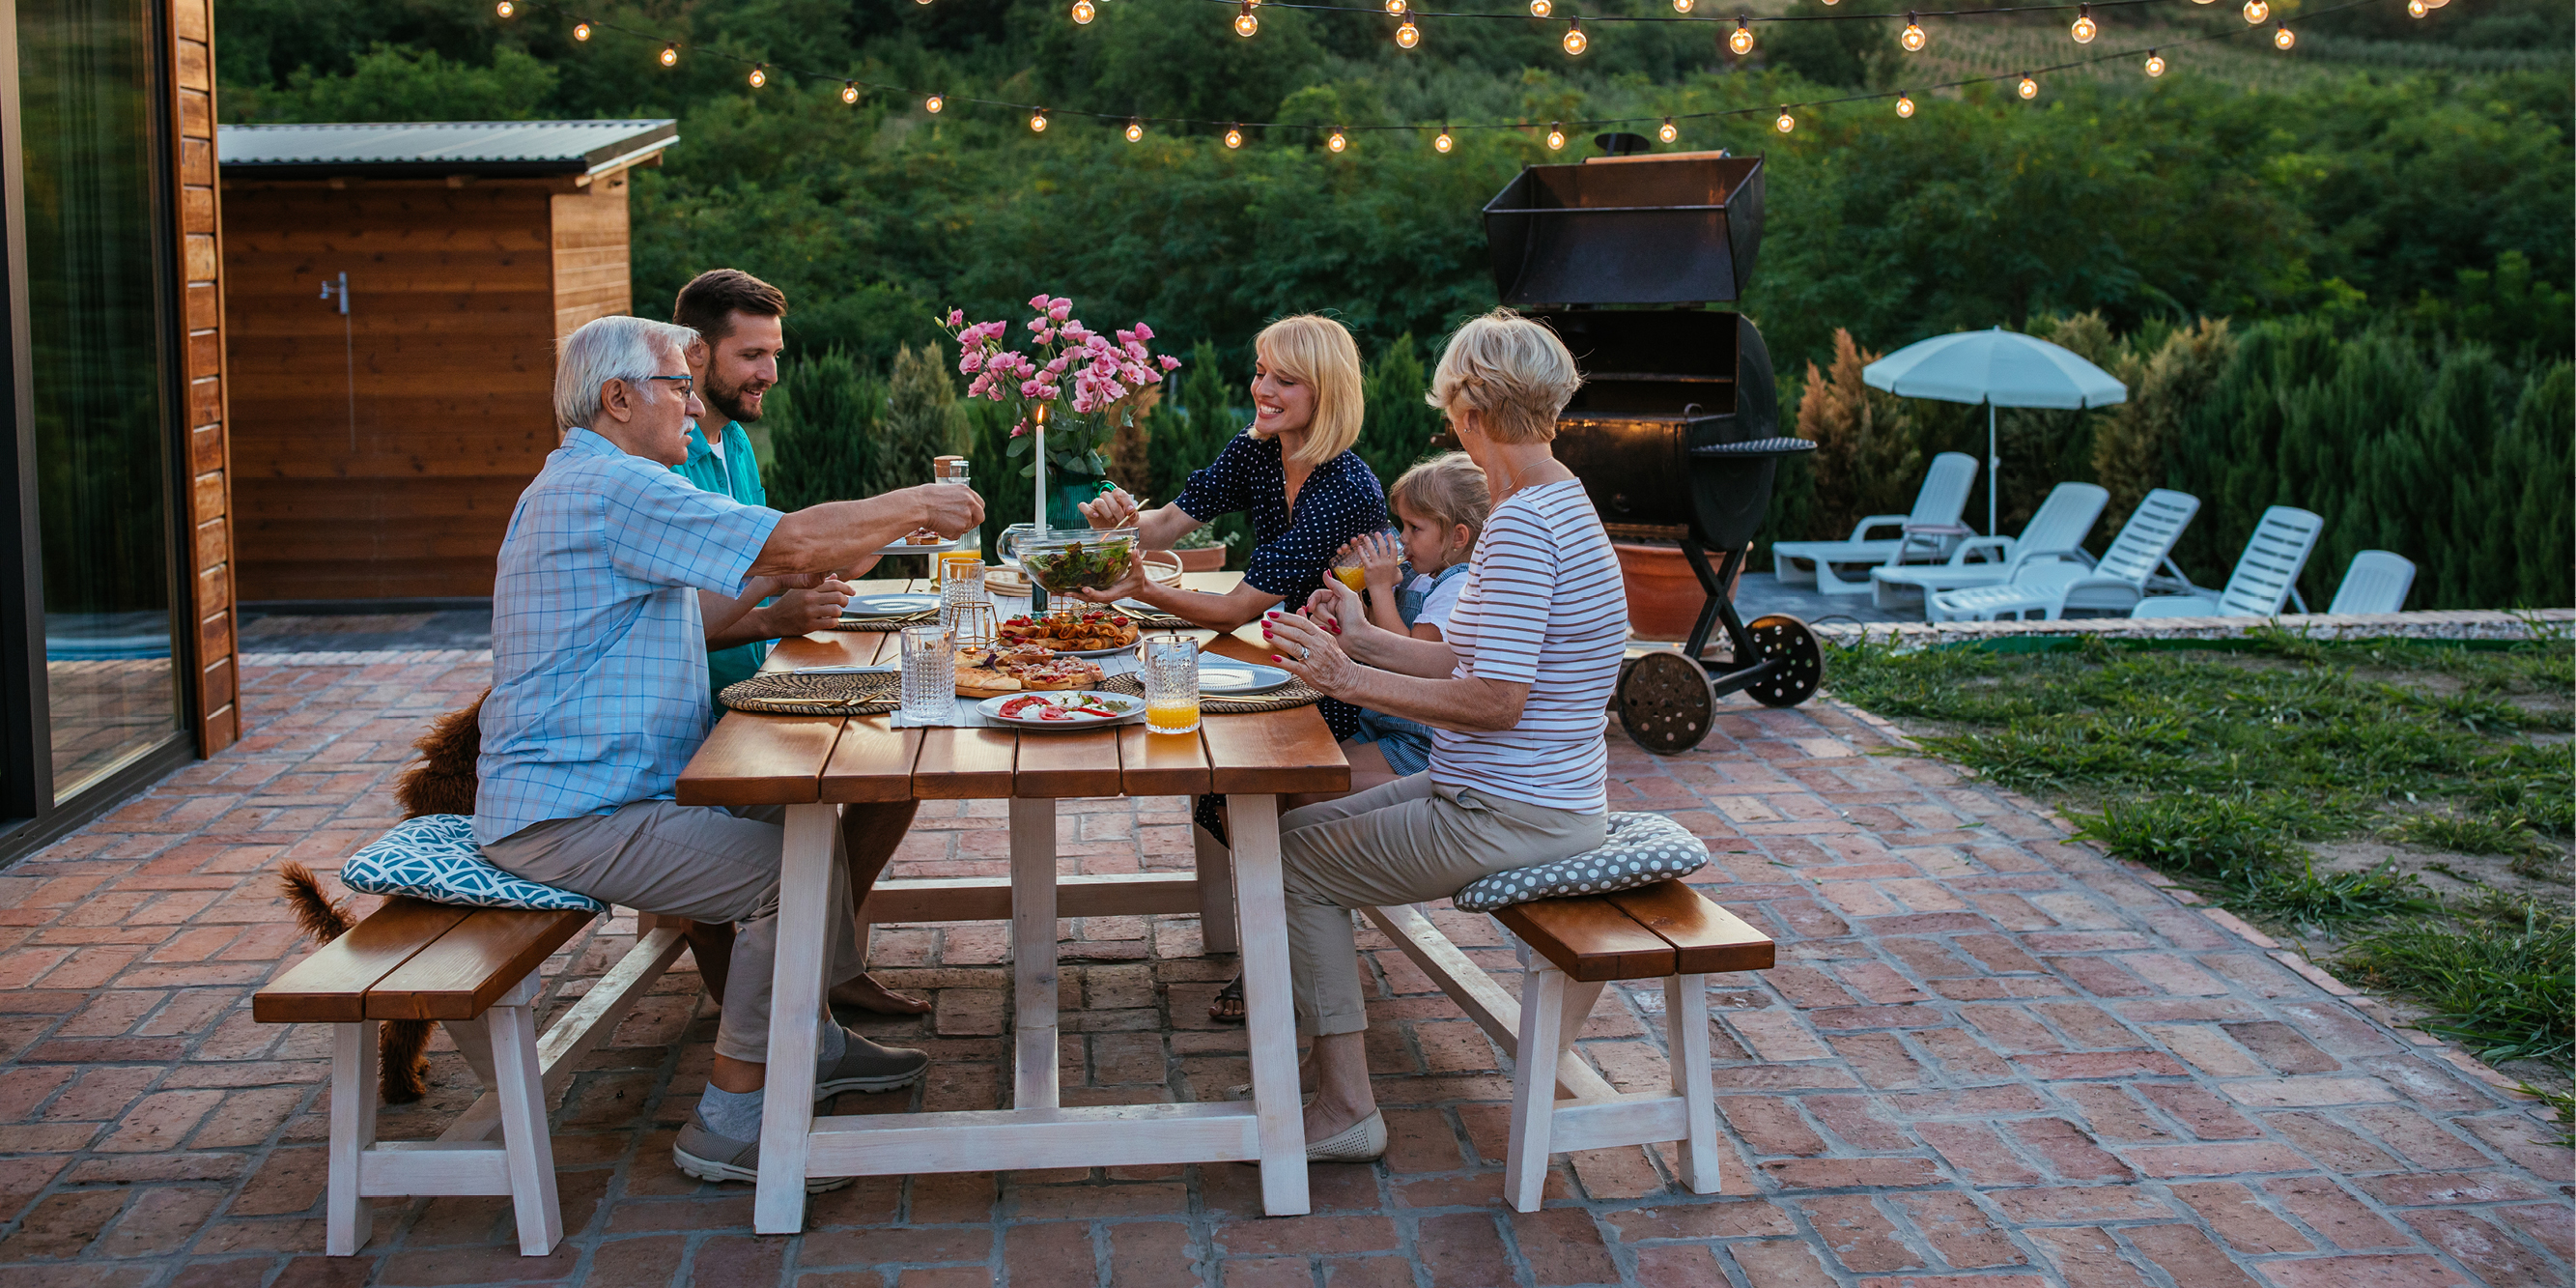 Multigenerational family eating dinner at an outdoor table.